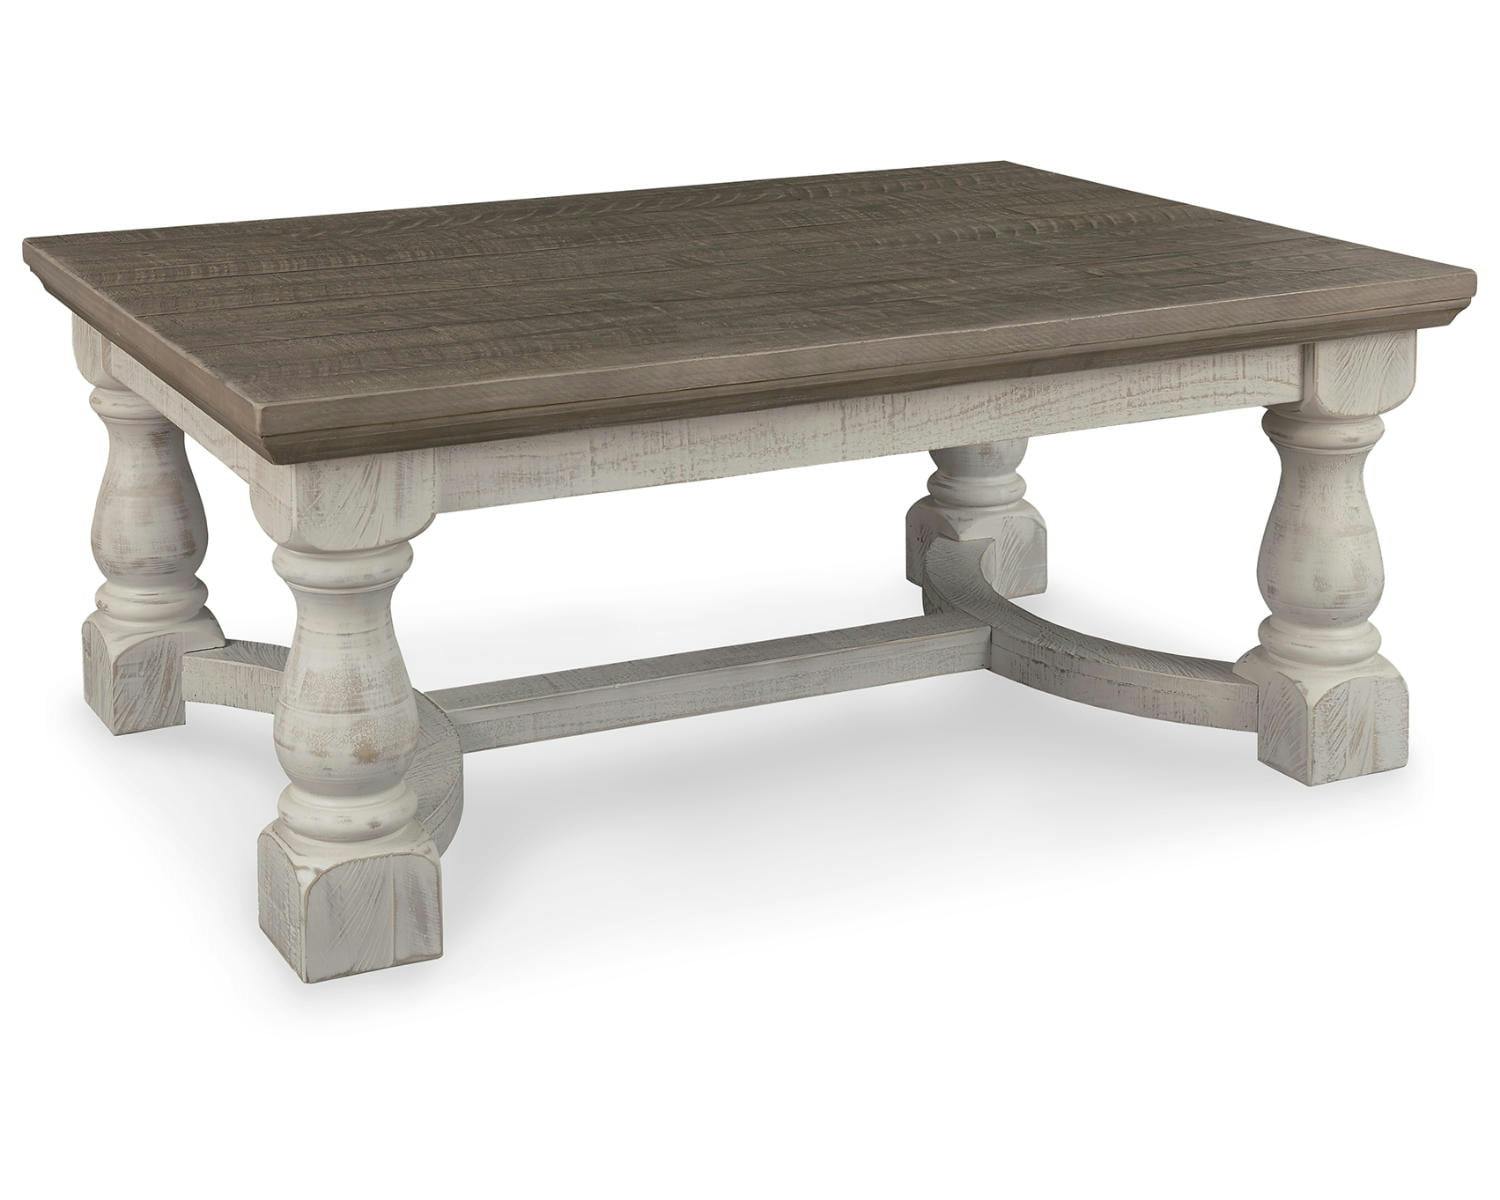 Havalance Rectangular Coffee Table in Weathered Gray and Vintage White